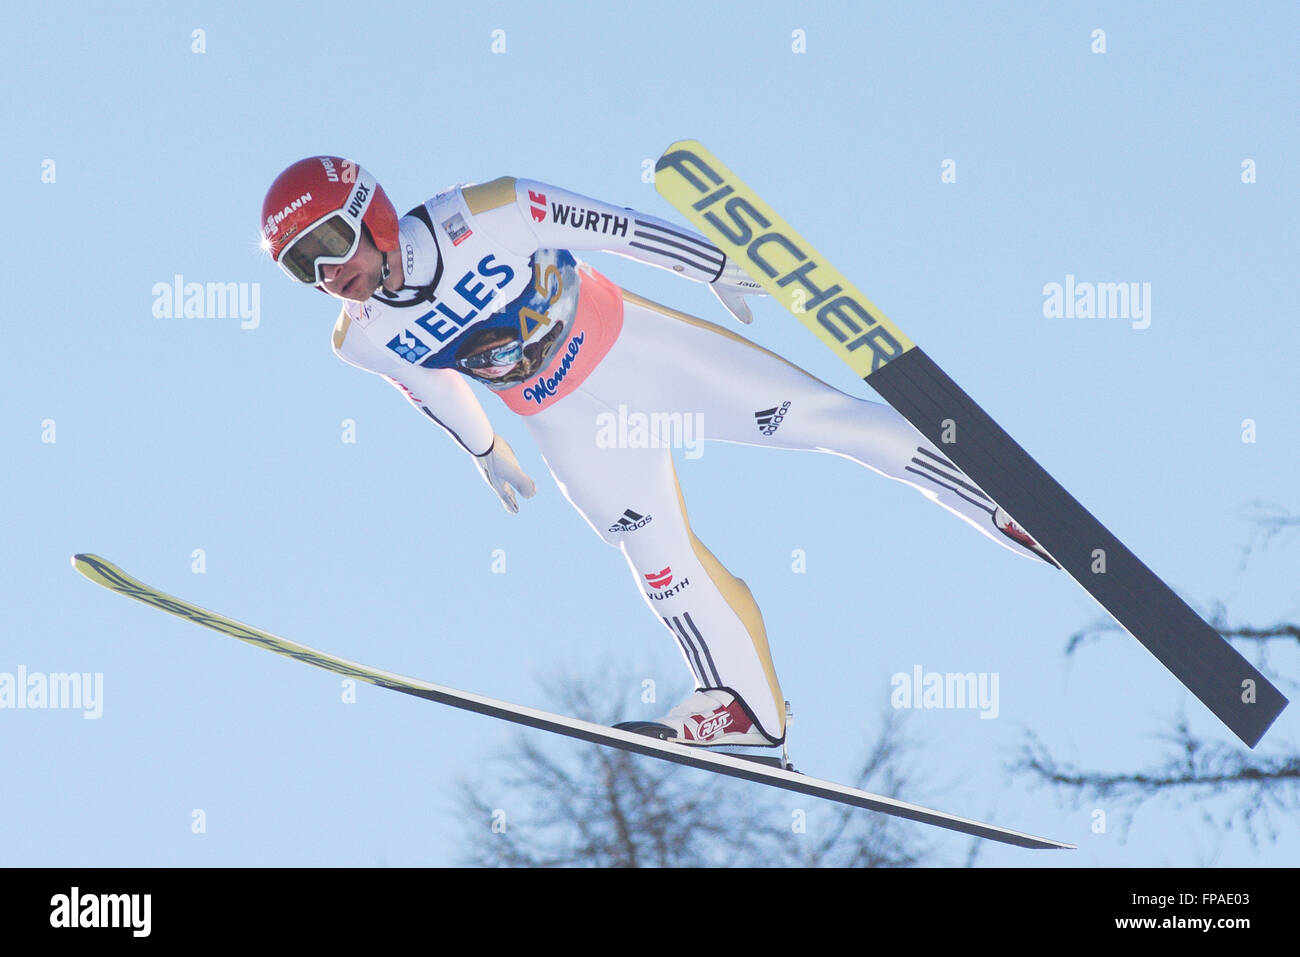 Planica, Slovenia. 18th Mar, 2016. Markus Eisenbichler of Germany competes during Planica FIS Ski Jumping World Cup finals on the March 18, 2016 in Planica, Slovenia. © Rok Rakun/Pacific Press/Alamy Live News Stock Photo